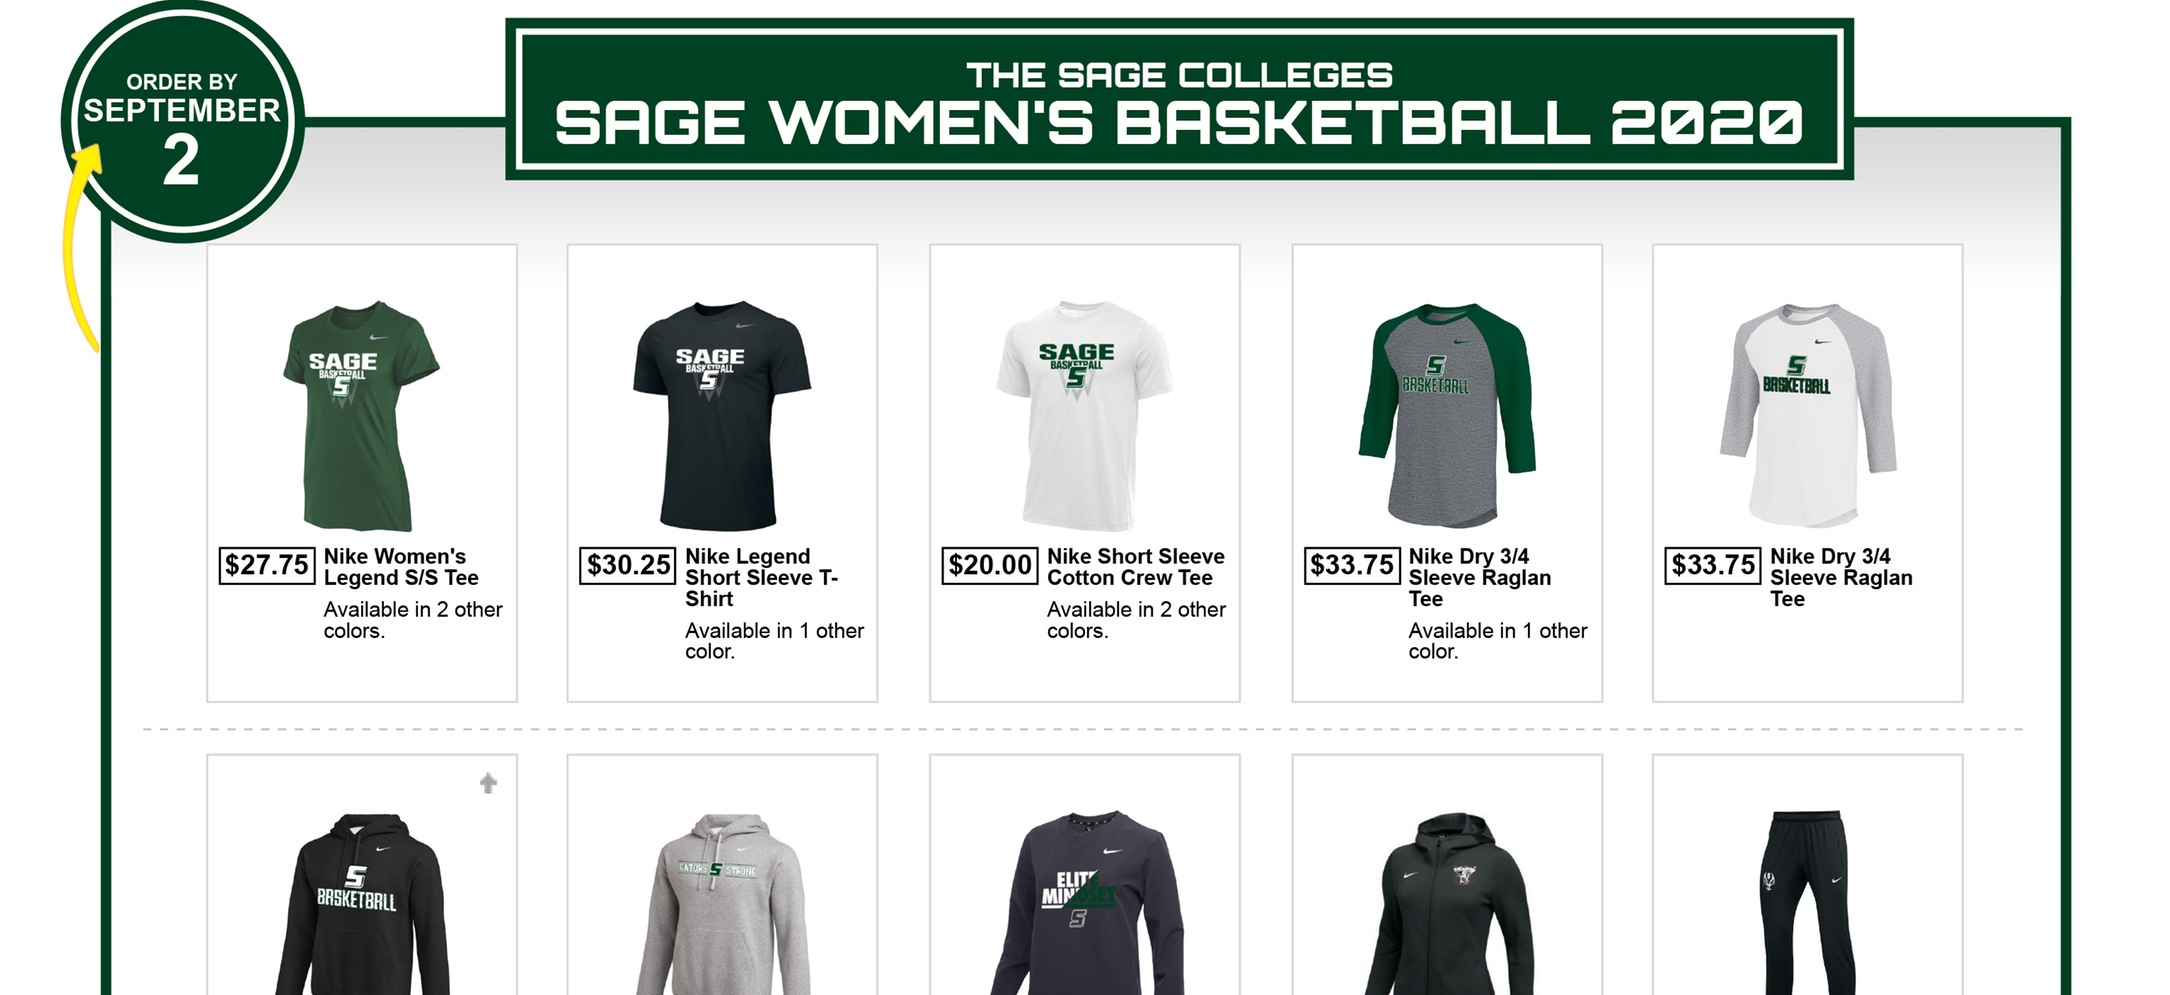 Support Sage Women's Basketball Team with a purchase on their Team Store Now through September 2